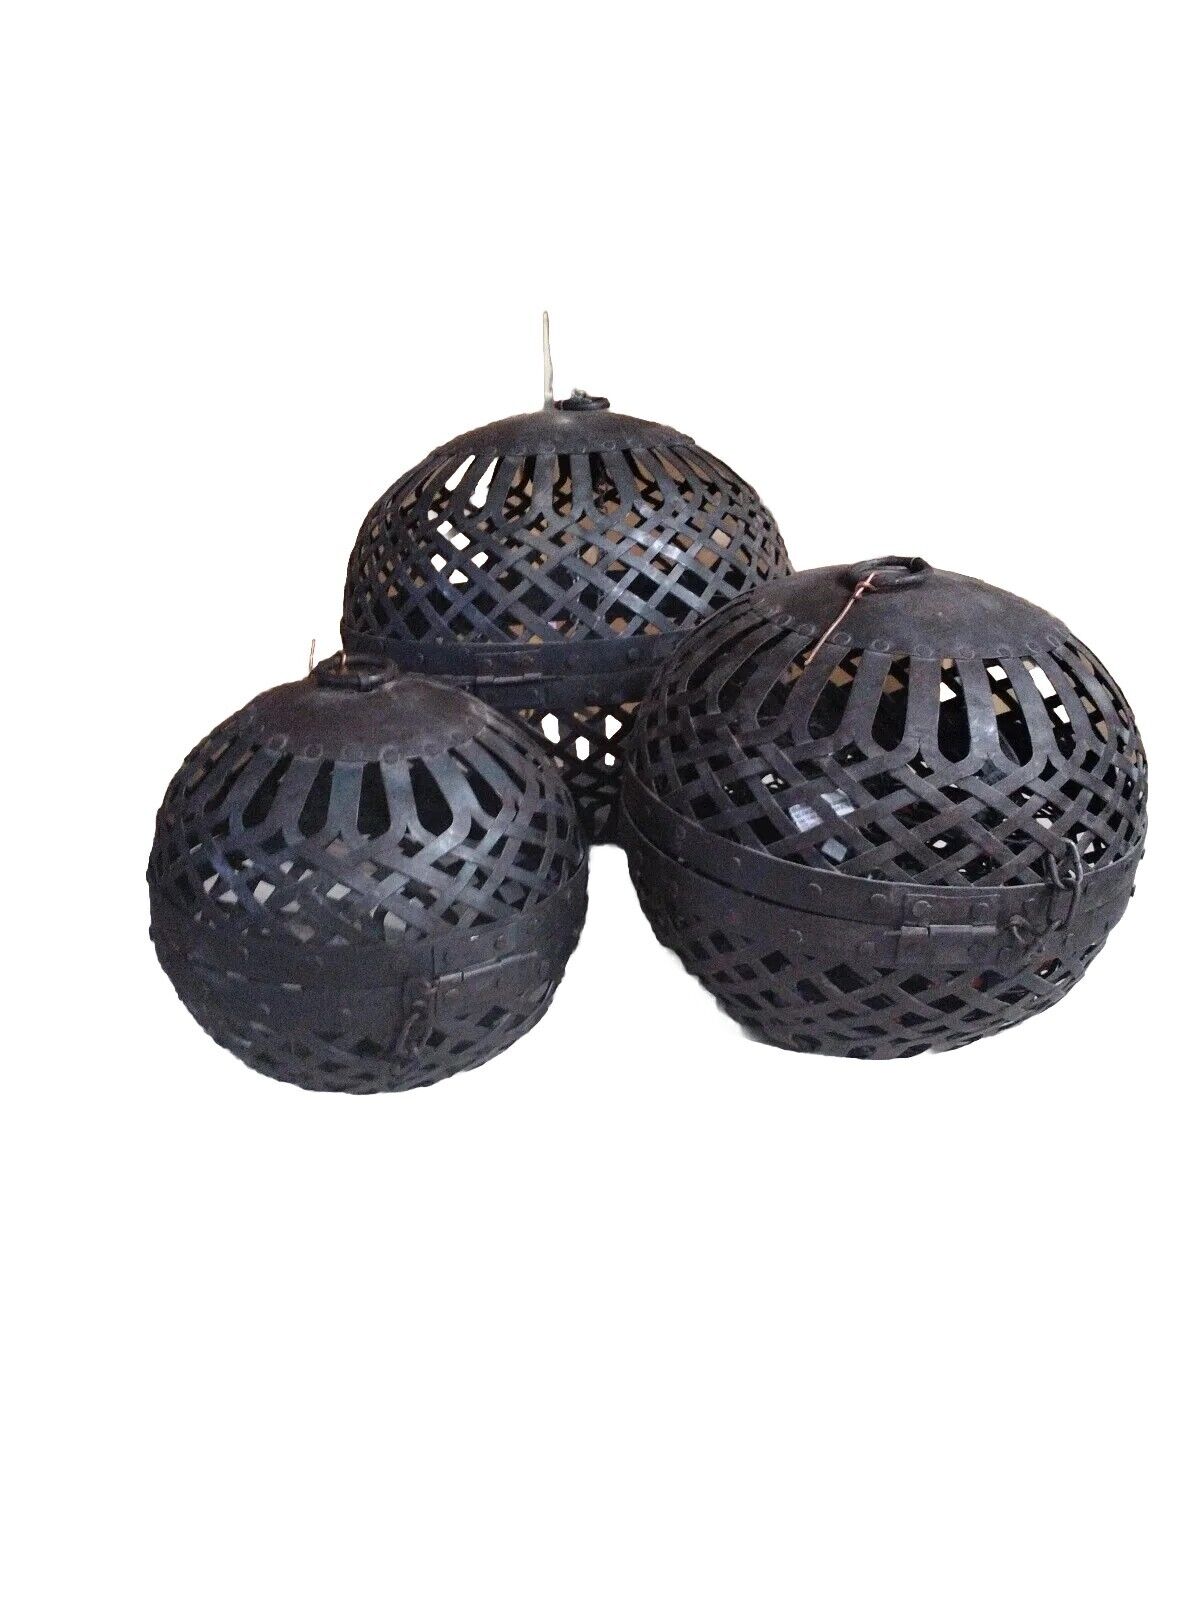 Vintage Gothic Style Medieval Ball Light Cages